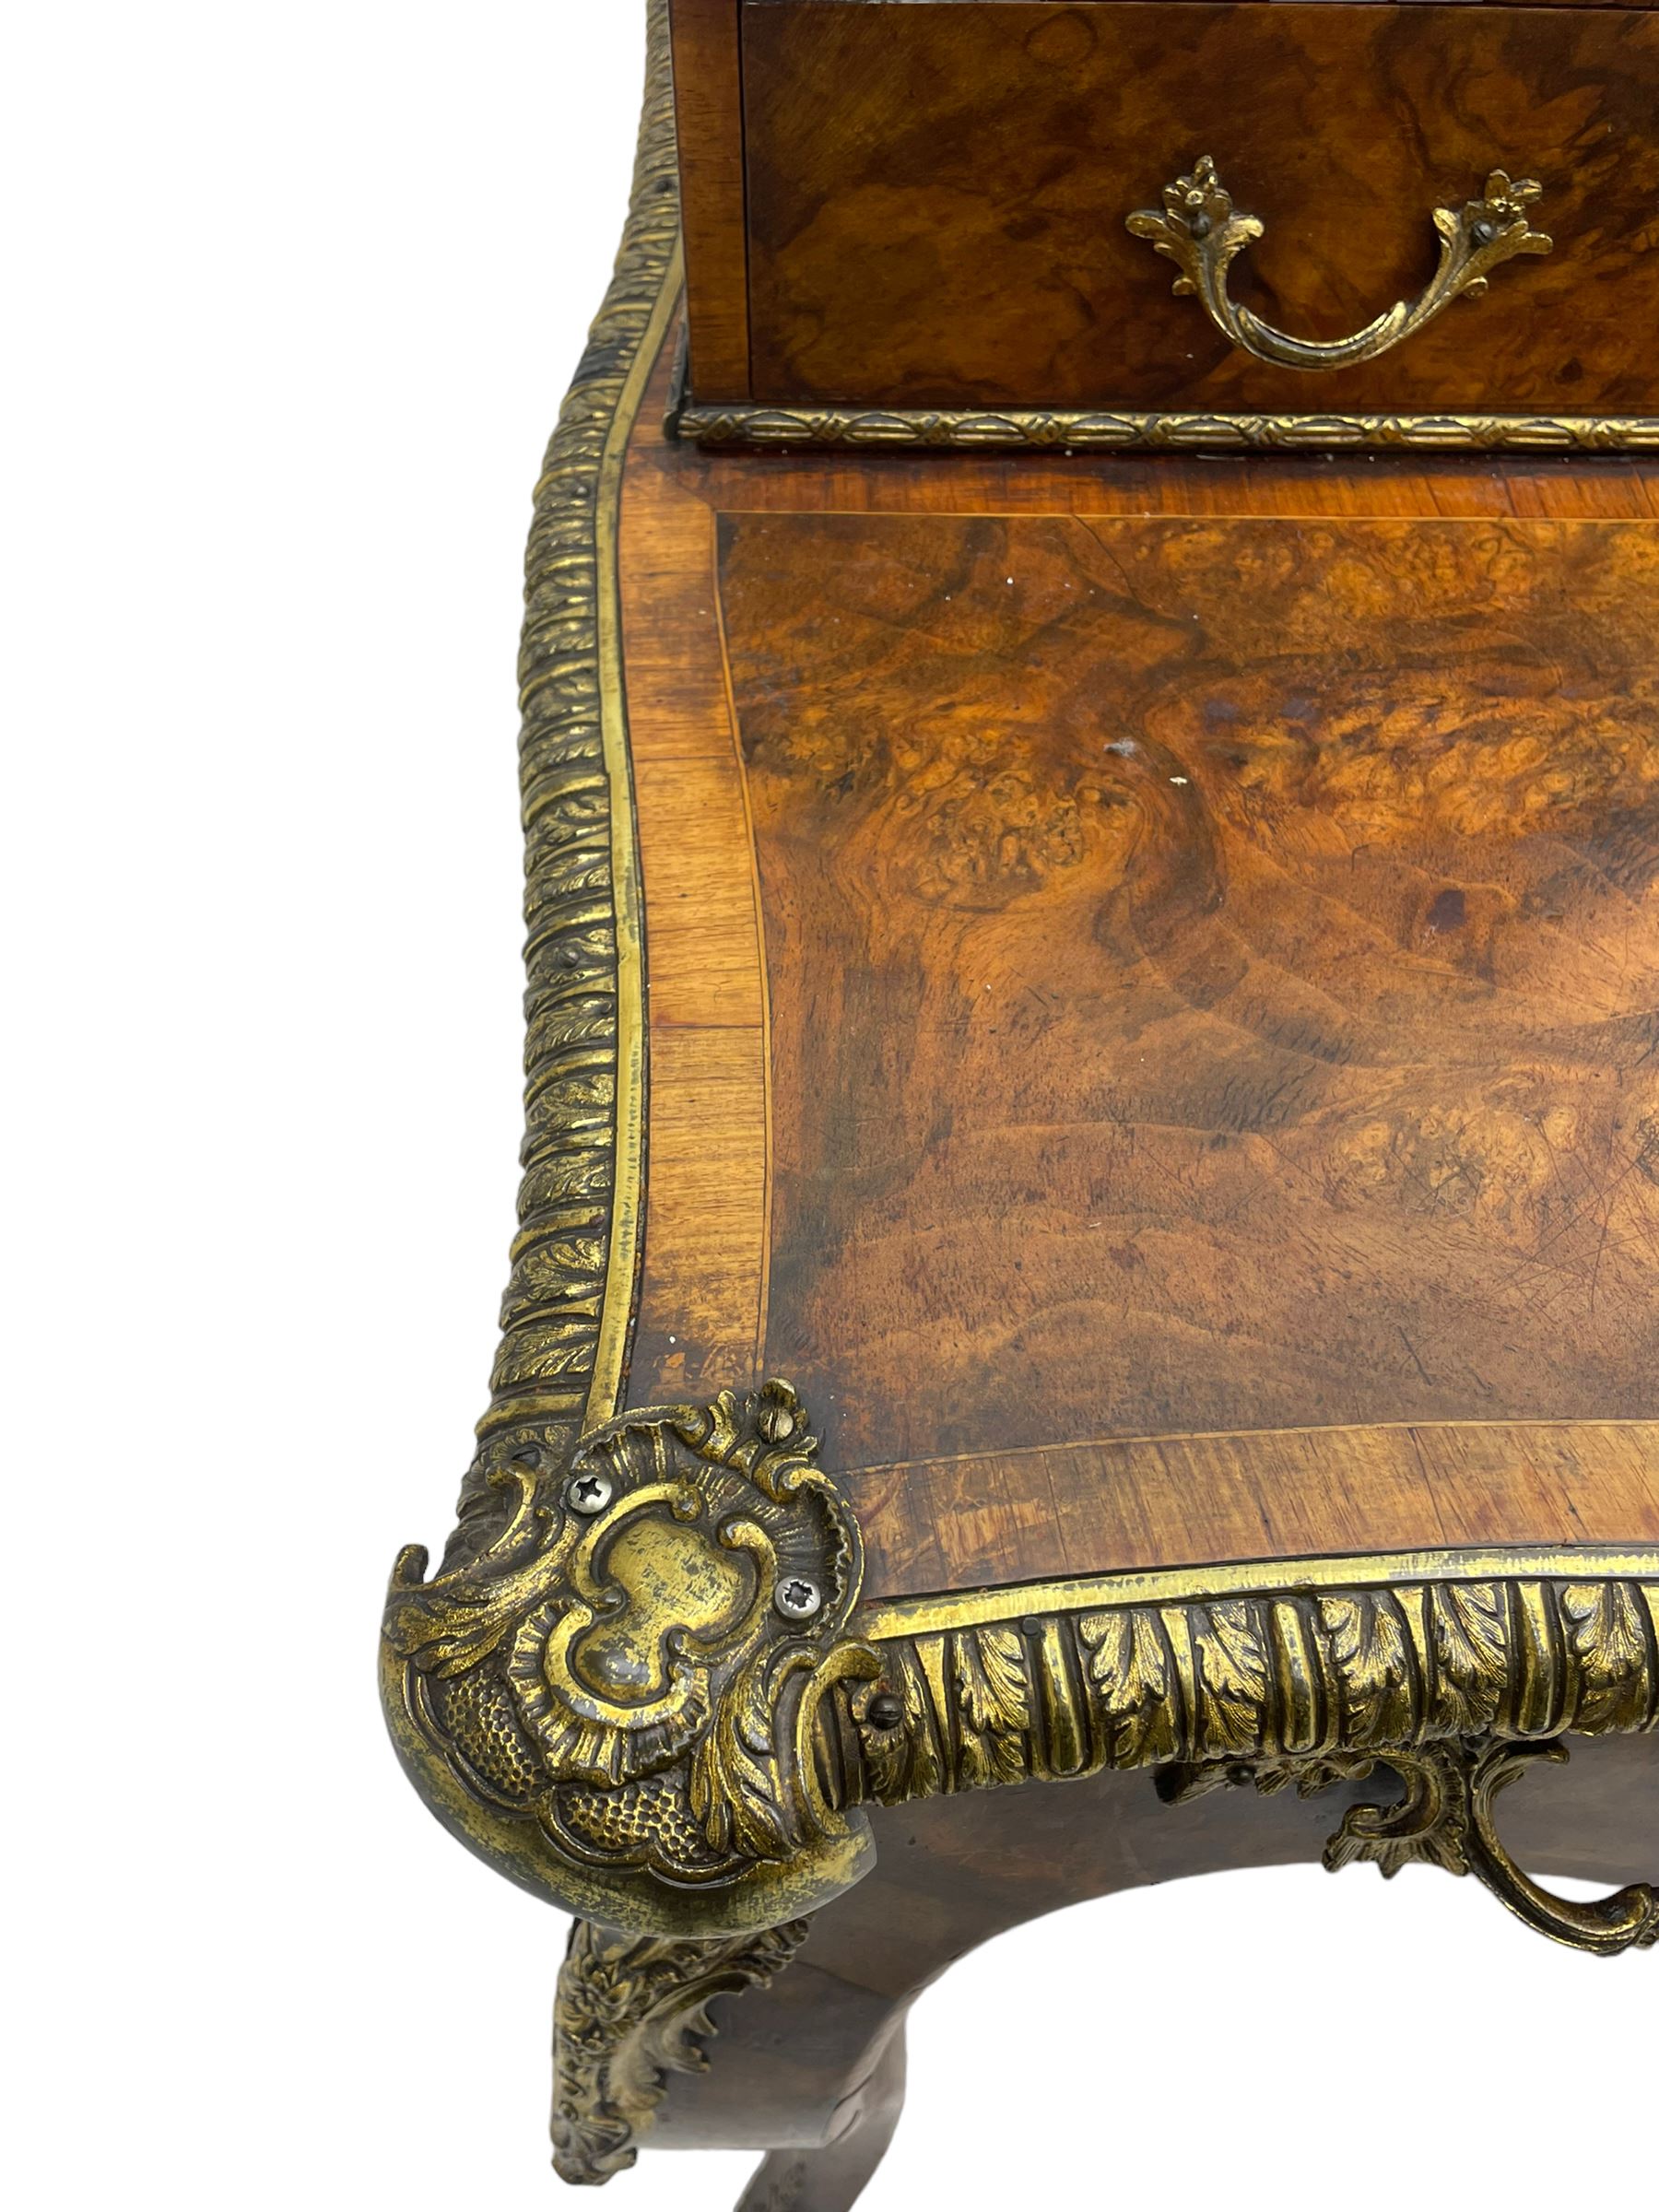 Late 19th to early 20th century French figured walnut writing desk - Image 7 of 13